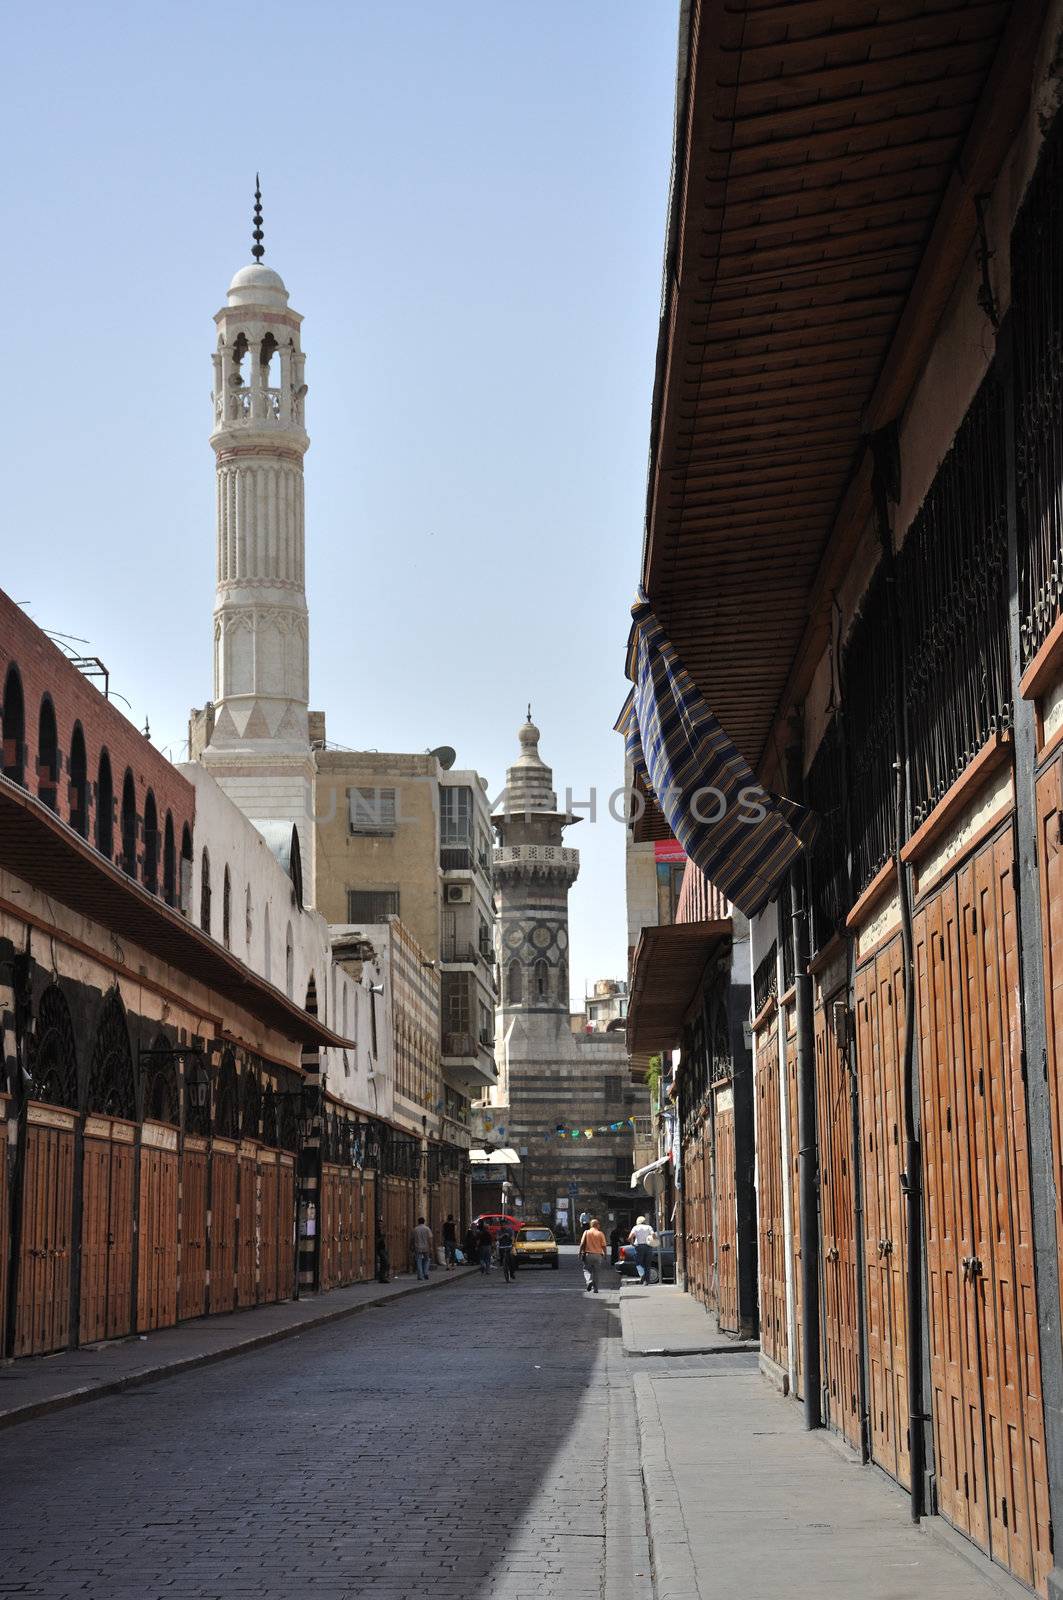 Medhat Pasha Souq (also called Al-Taweel Souq) is a historical souk which forms the eastern half of the Street Called Straight inside the old walled city of Damascus, Syria. It is closed because of friday.